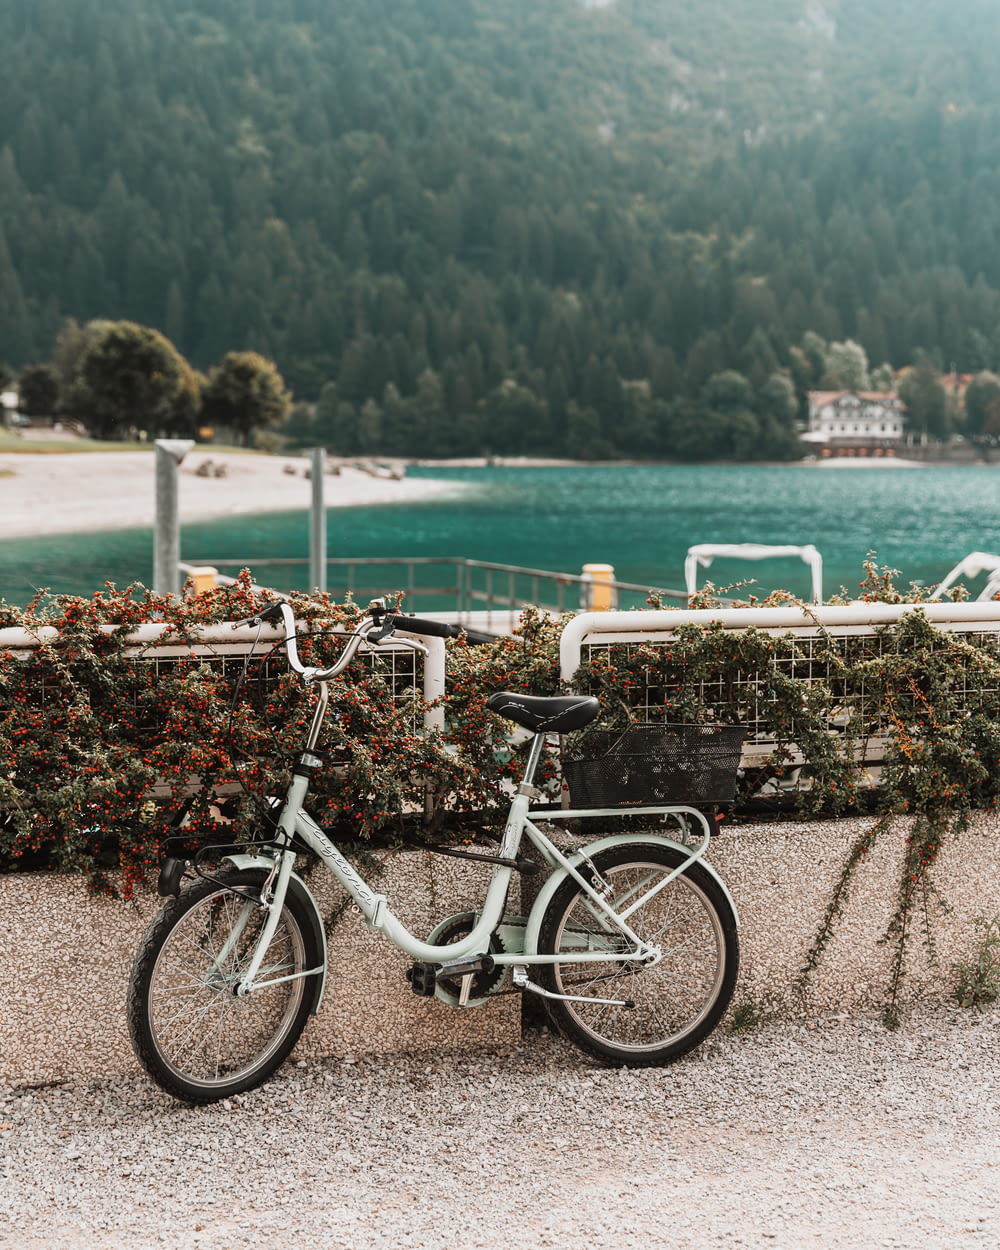 a bicycle parked next to a fence near a body of water